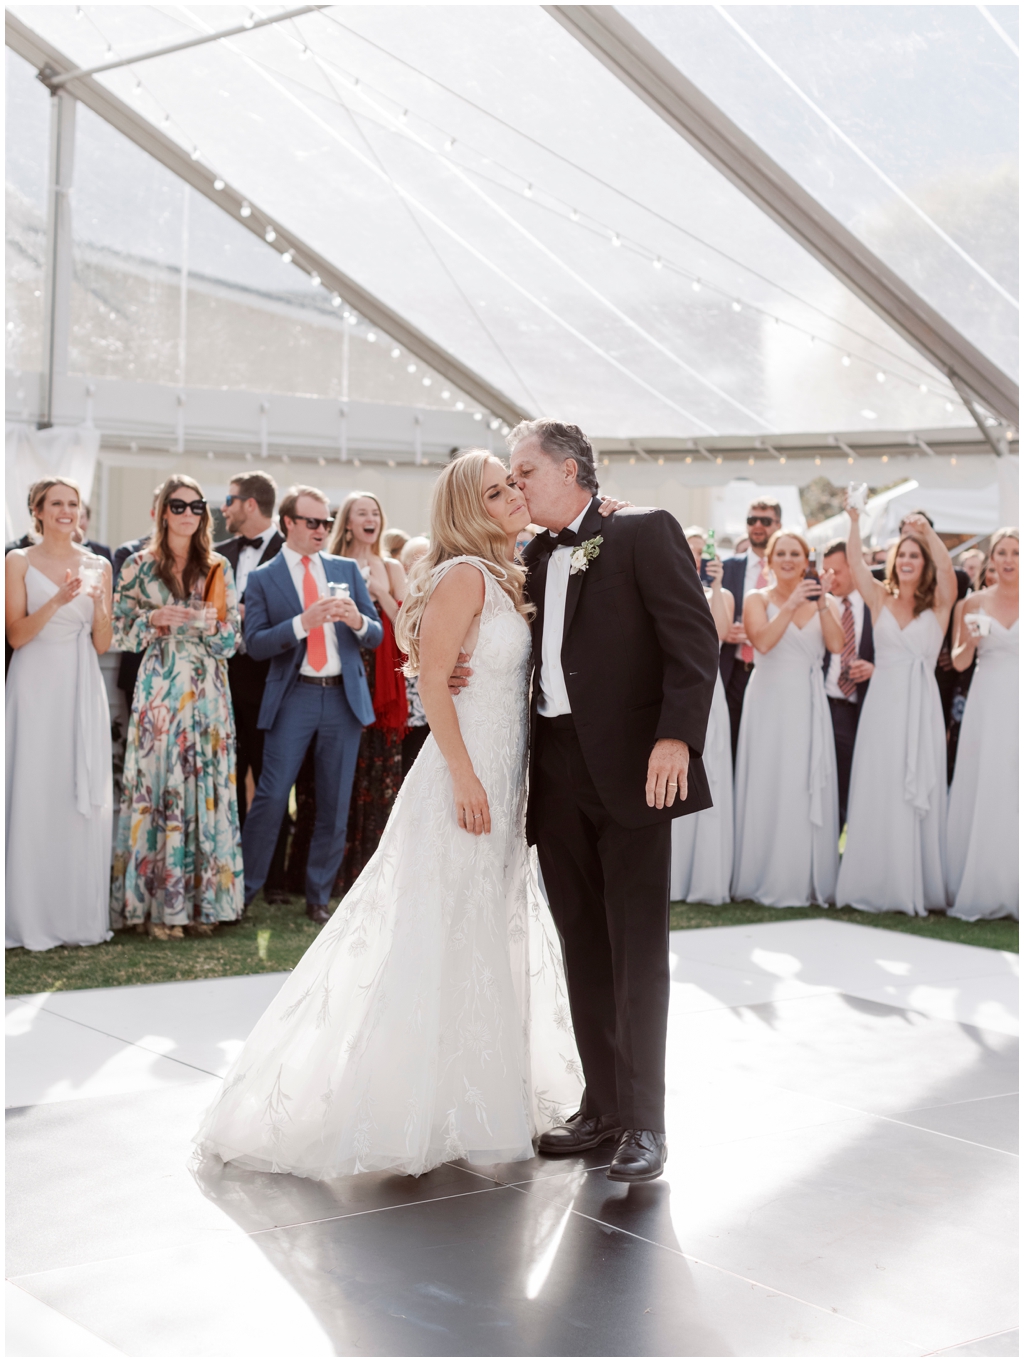 Father of the bride affectionately kisses bride on the cheek after their first dance. 